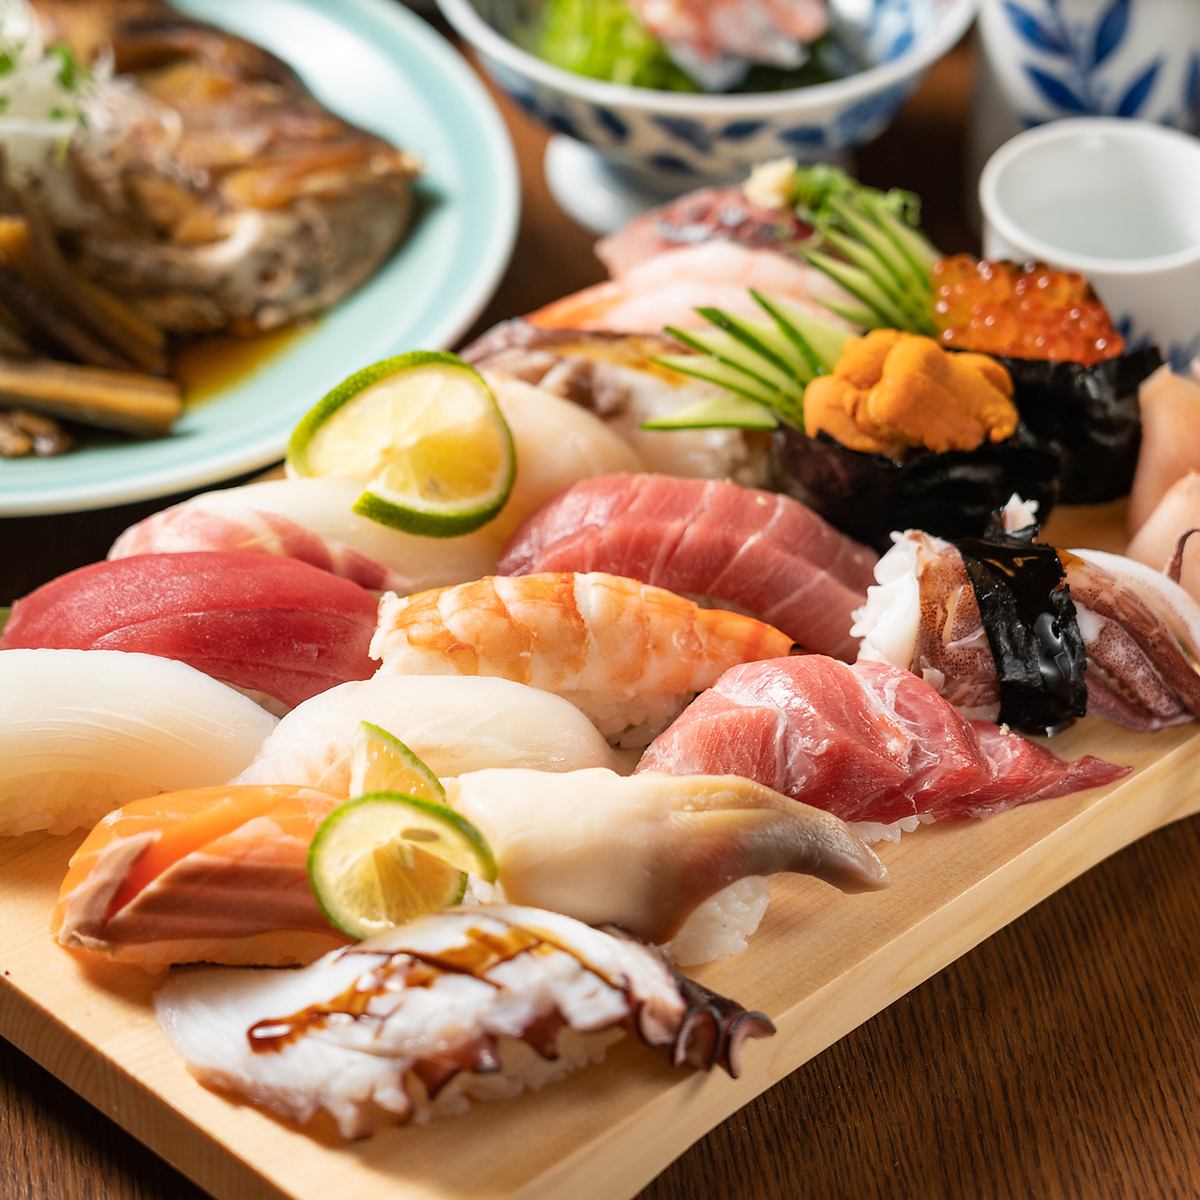 Enjoy the fresh seafood carefully selected ♪ We are proud of the taste and freshness!